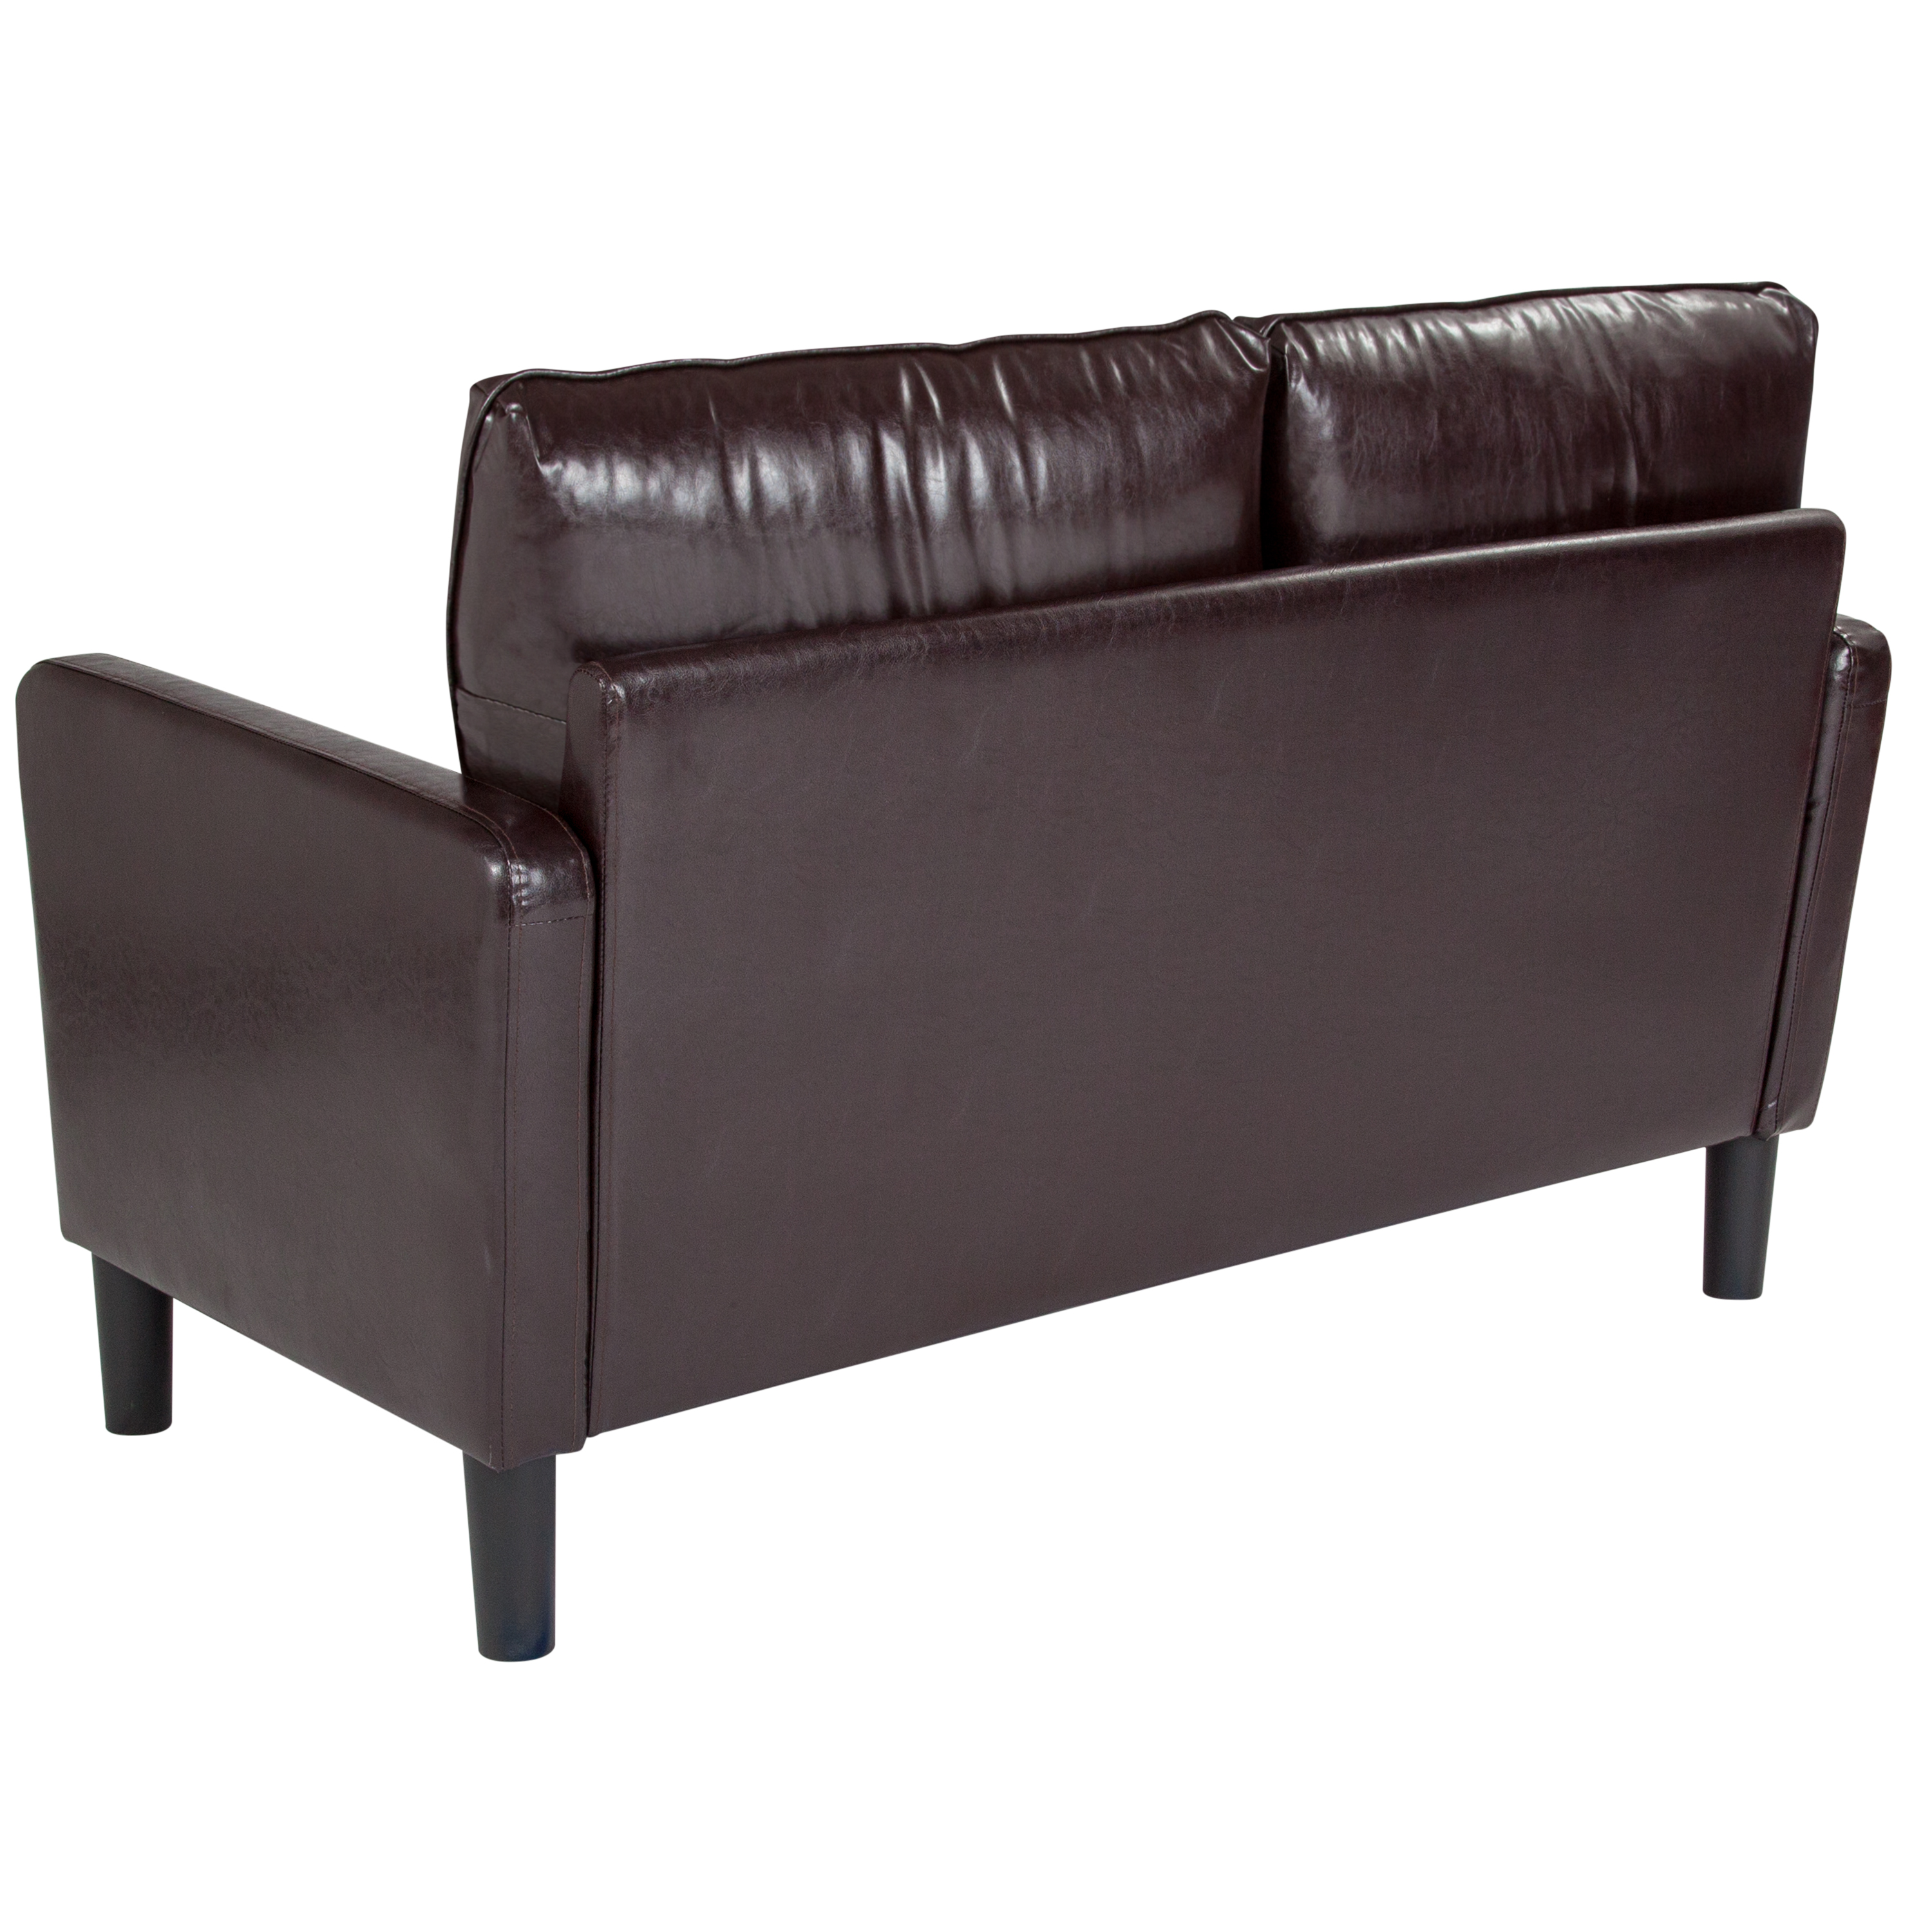 Flash Furniture Washington Park Upholstered Loveseat in Brown LeatherSoft - image 3 of 5